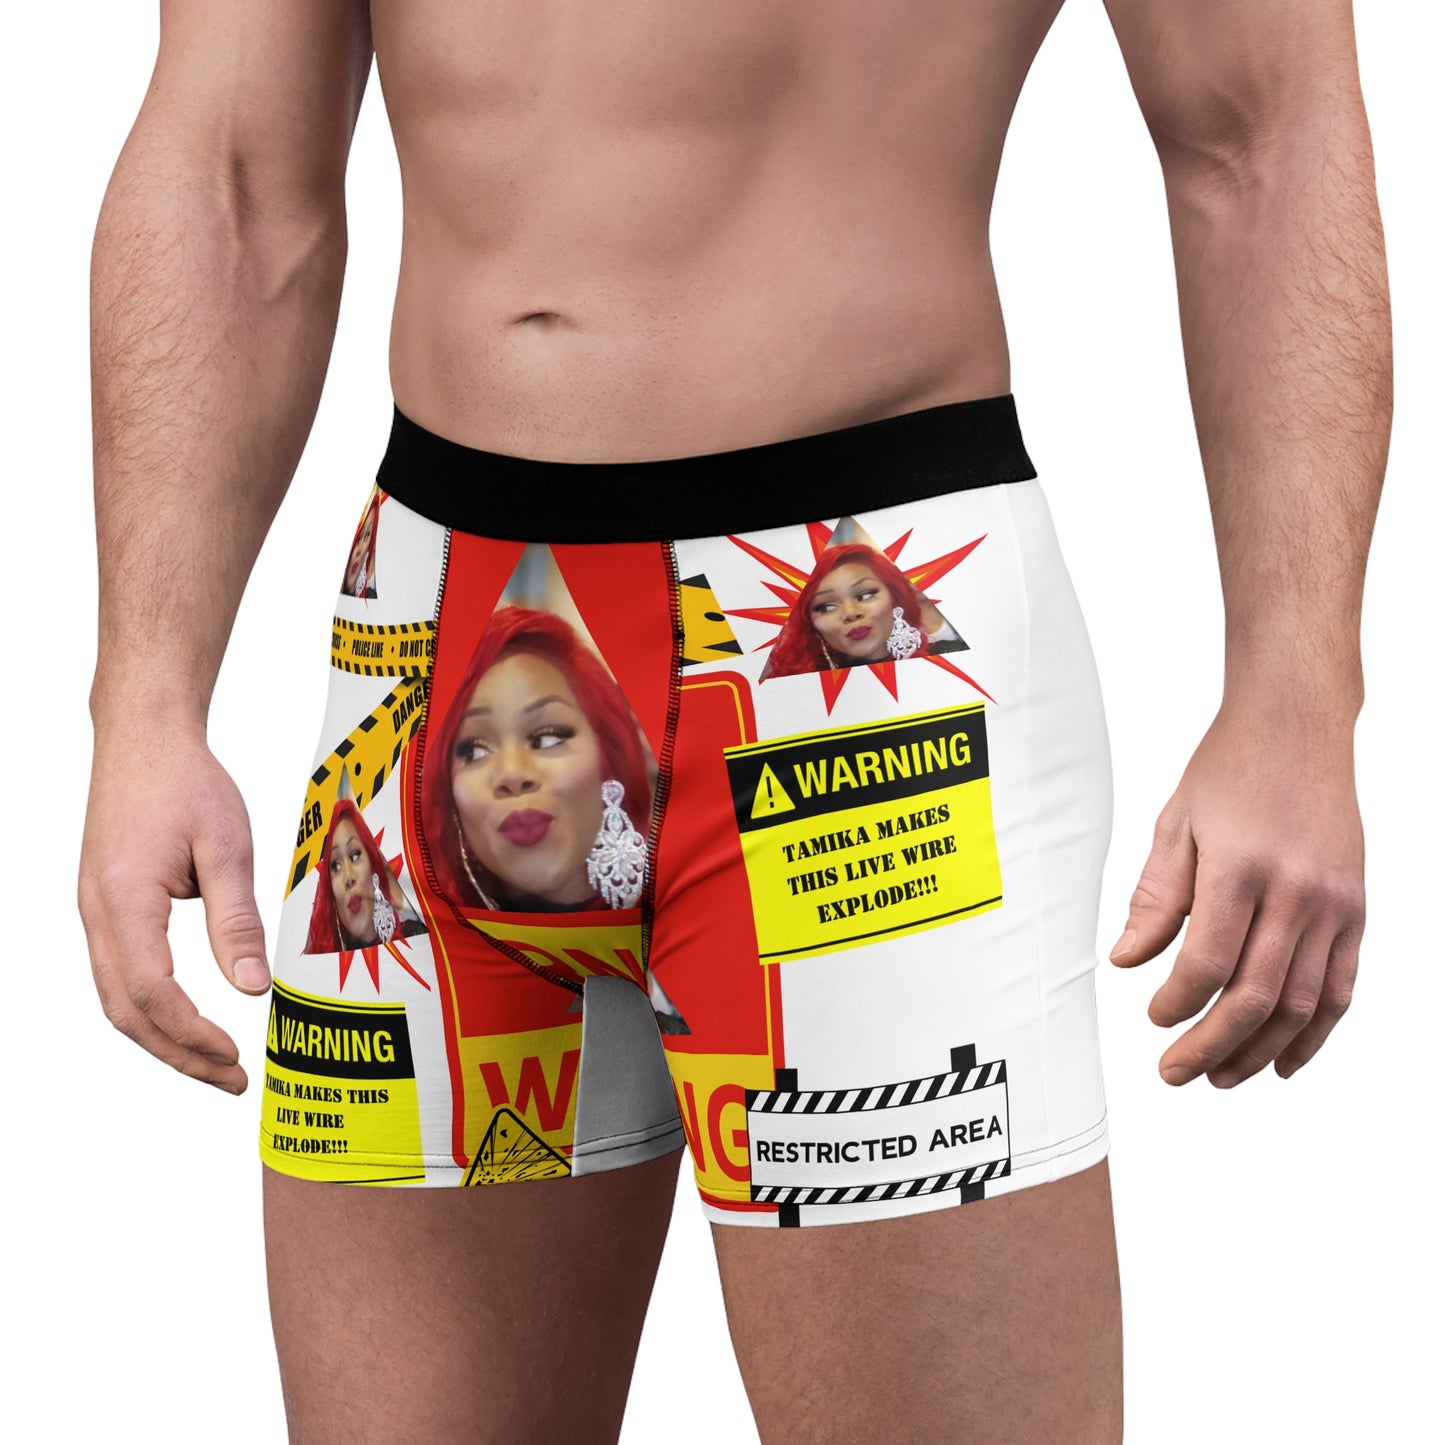 Personalized Face Boxers - "Warning"